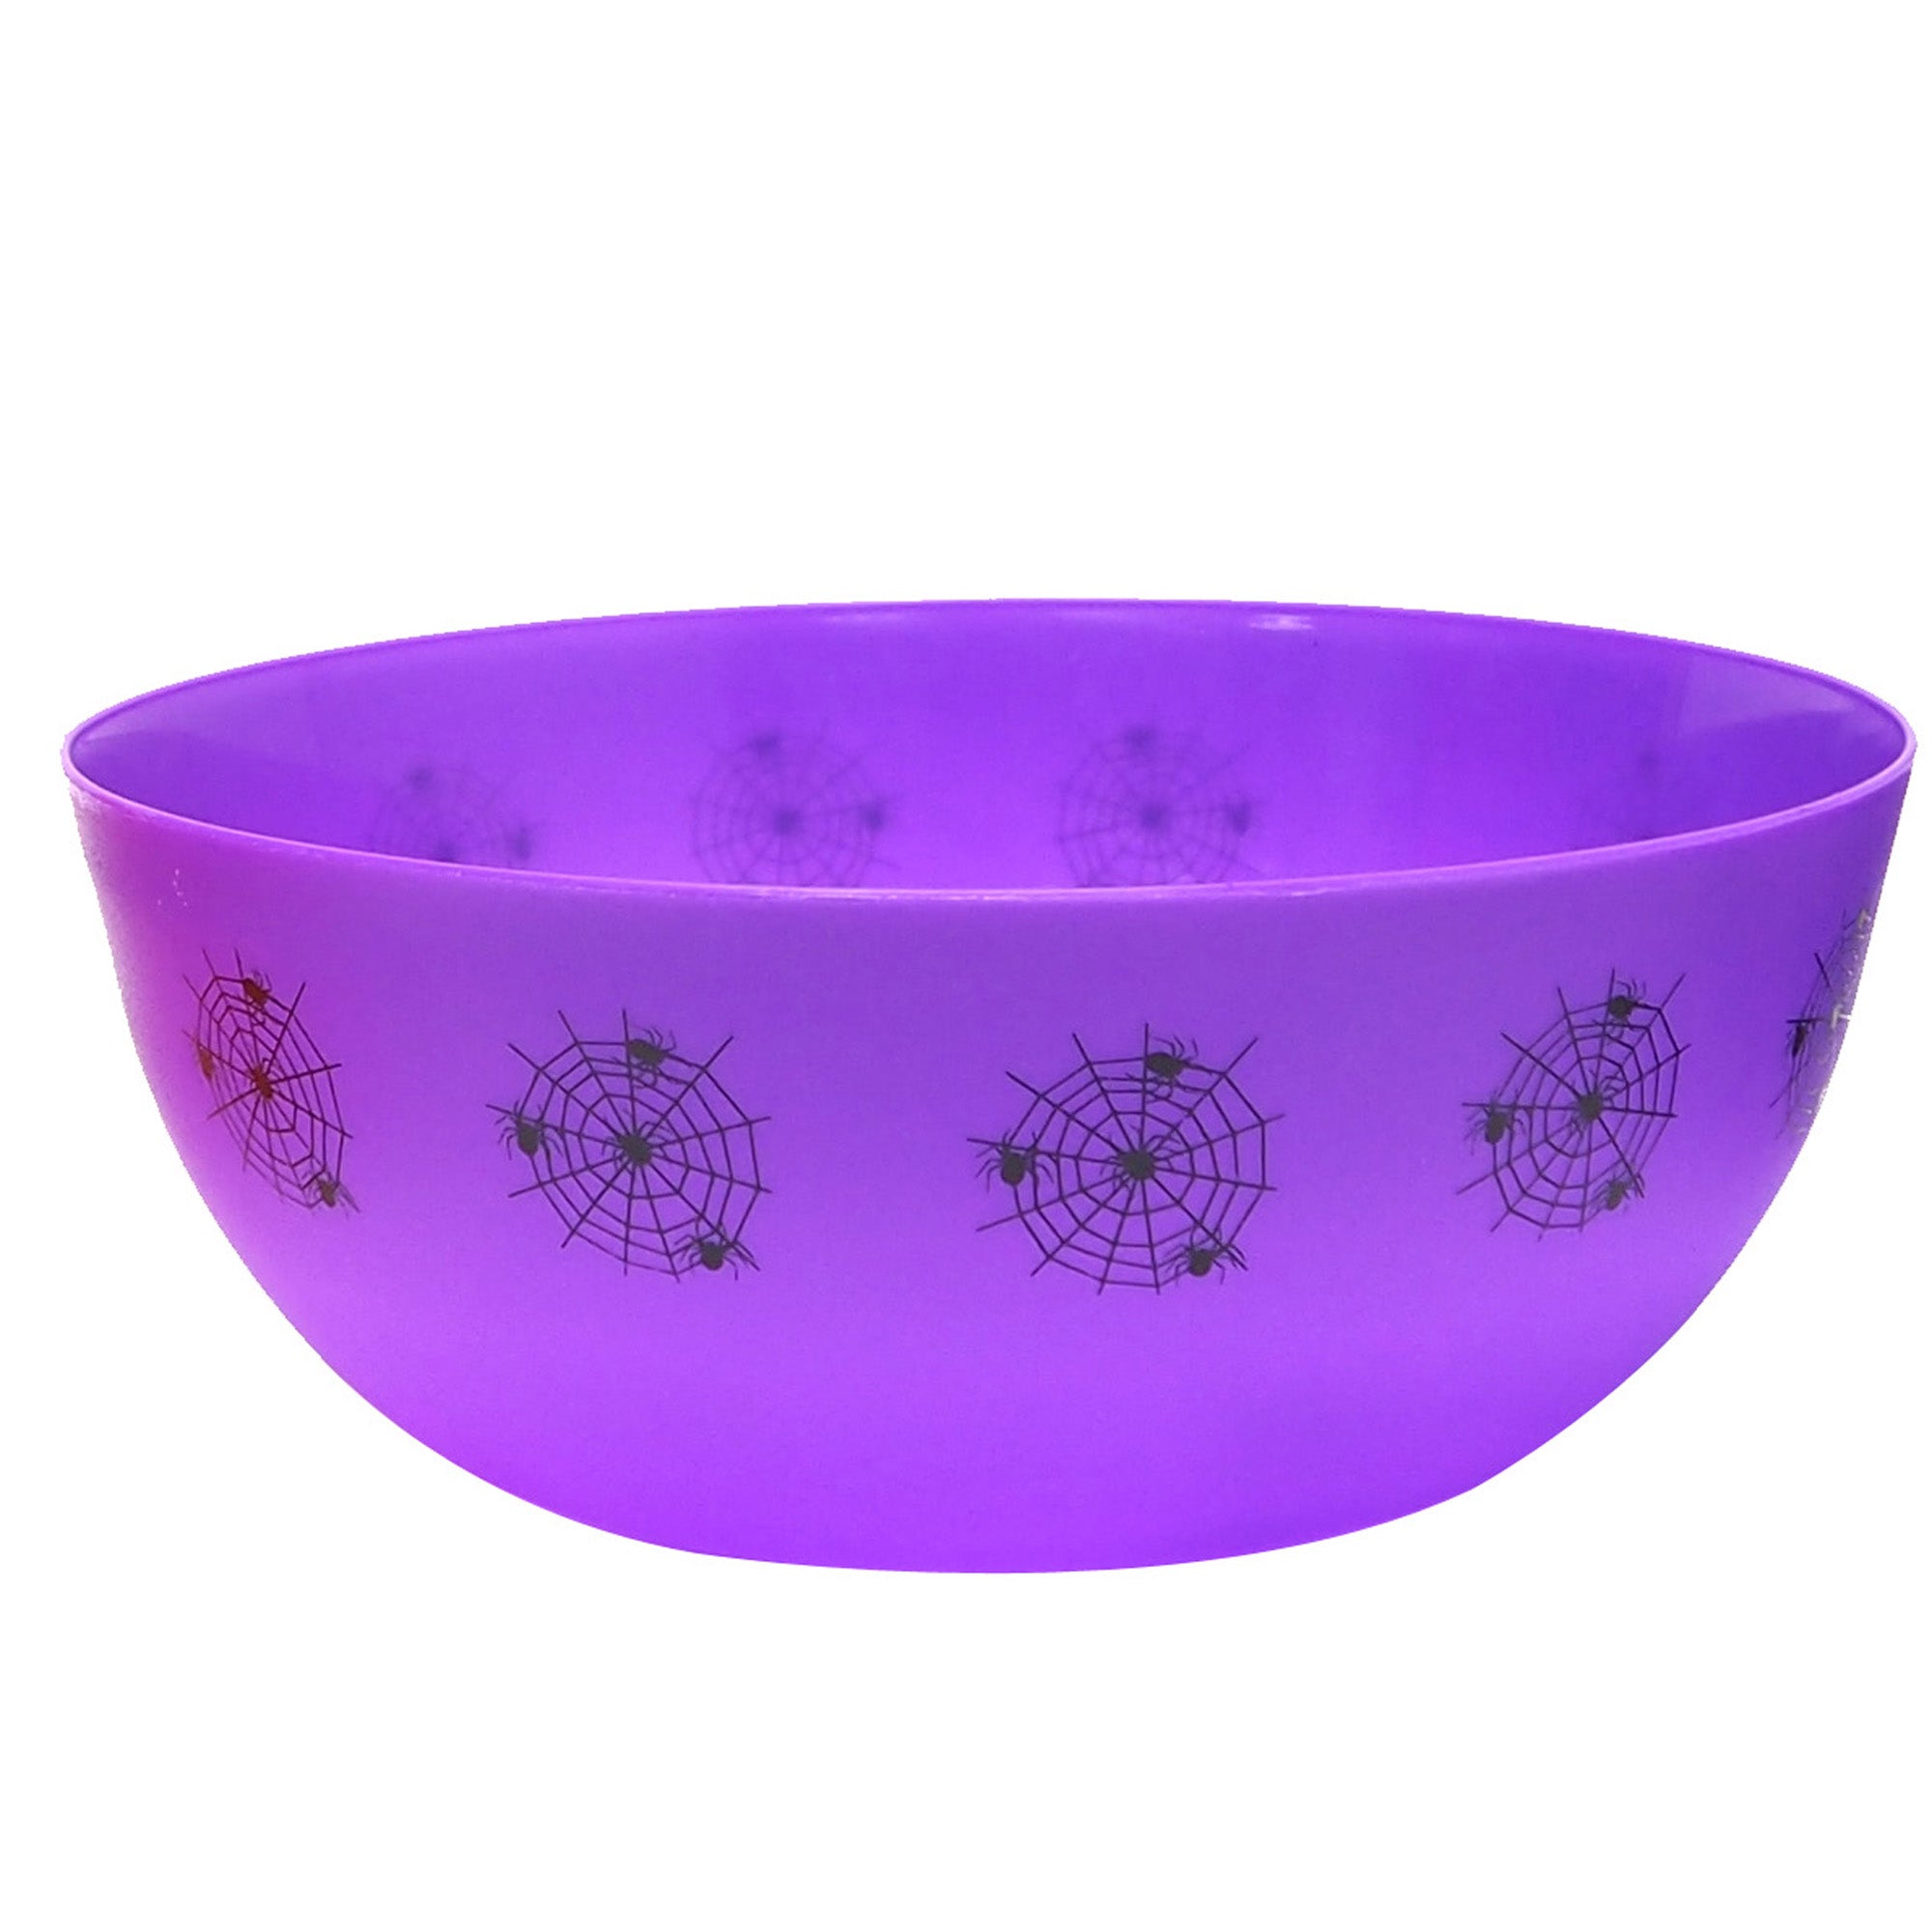 Trick Or Treat Candy Bowl 25cm Purple